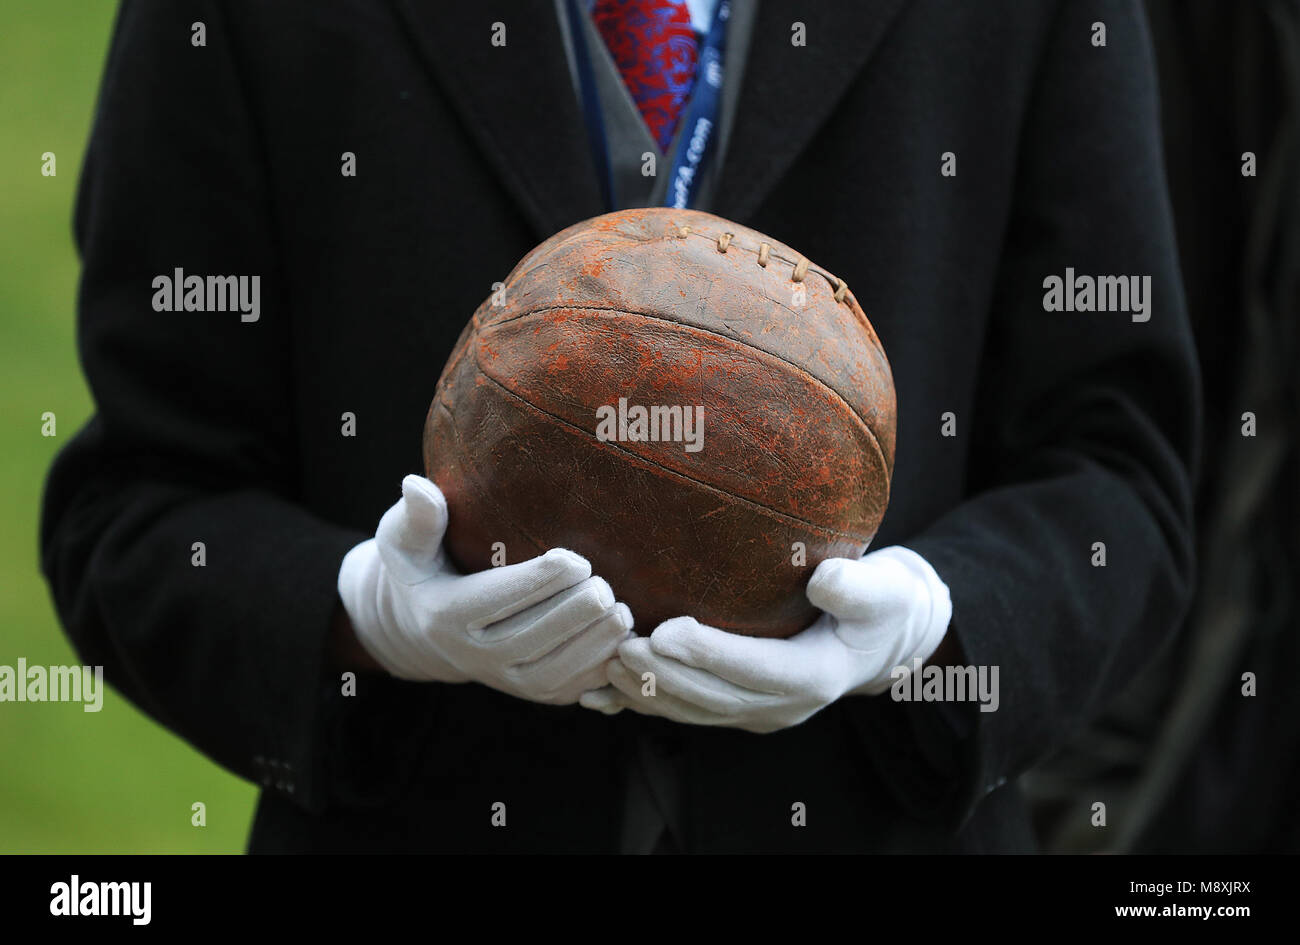 The only known surviving Somme football, the ball 'kicked over the top', from The National Football Museum during the media day at St George's Park, Burton. England players from the senior men's, women's and development teams will plant 14 trees at St. George's Park to remember the 14 England International footballers involved in the First World War, kicking off a partnership between The FA, Woodland Trust and National Football Museum. Stock Photo